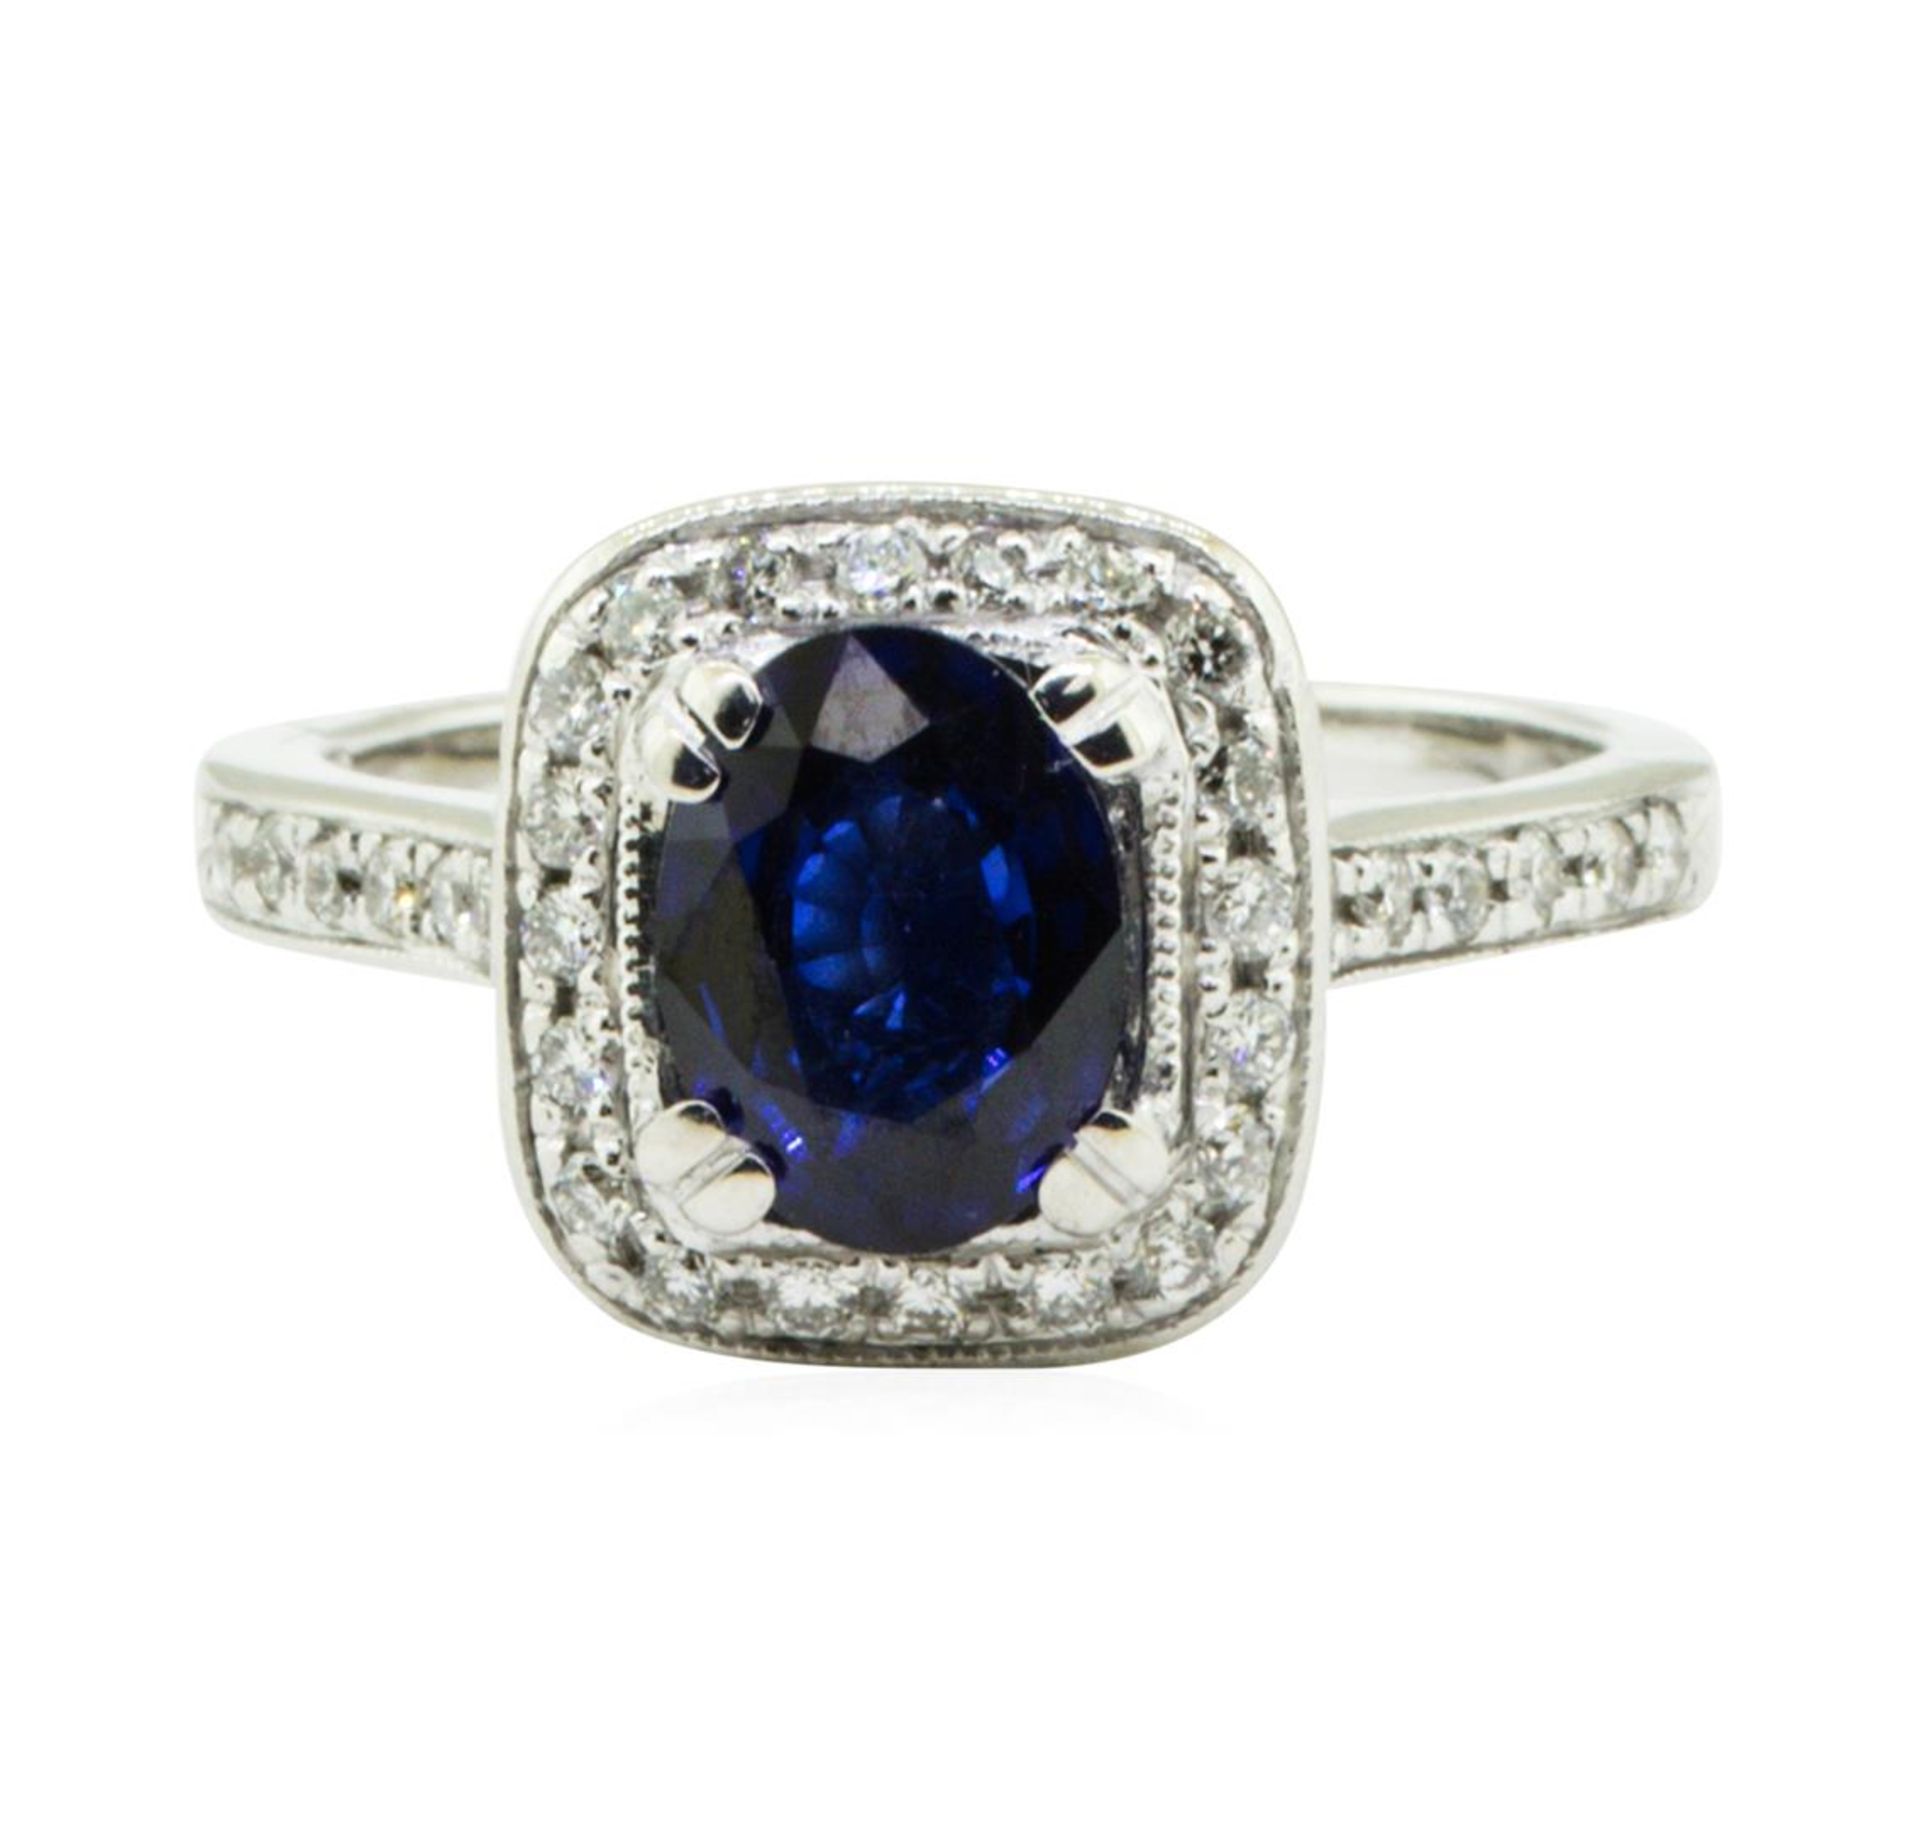 1.68 ctw Oval Brilliant Blue Sapphire And Diamond Ring - 14KT White Gold - Image 2 of 5